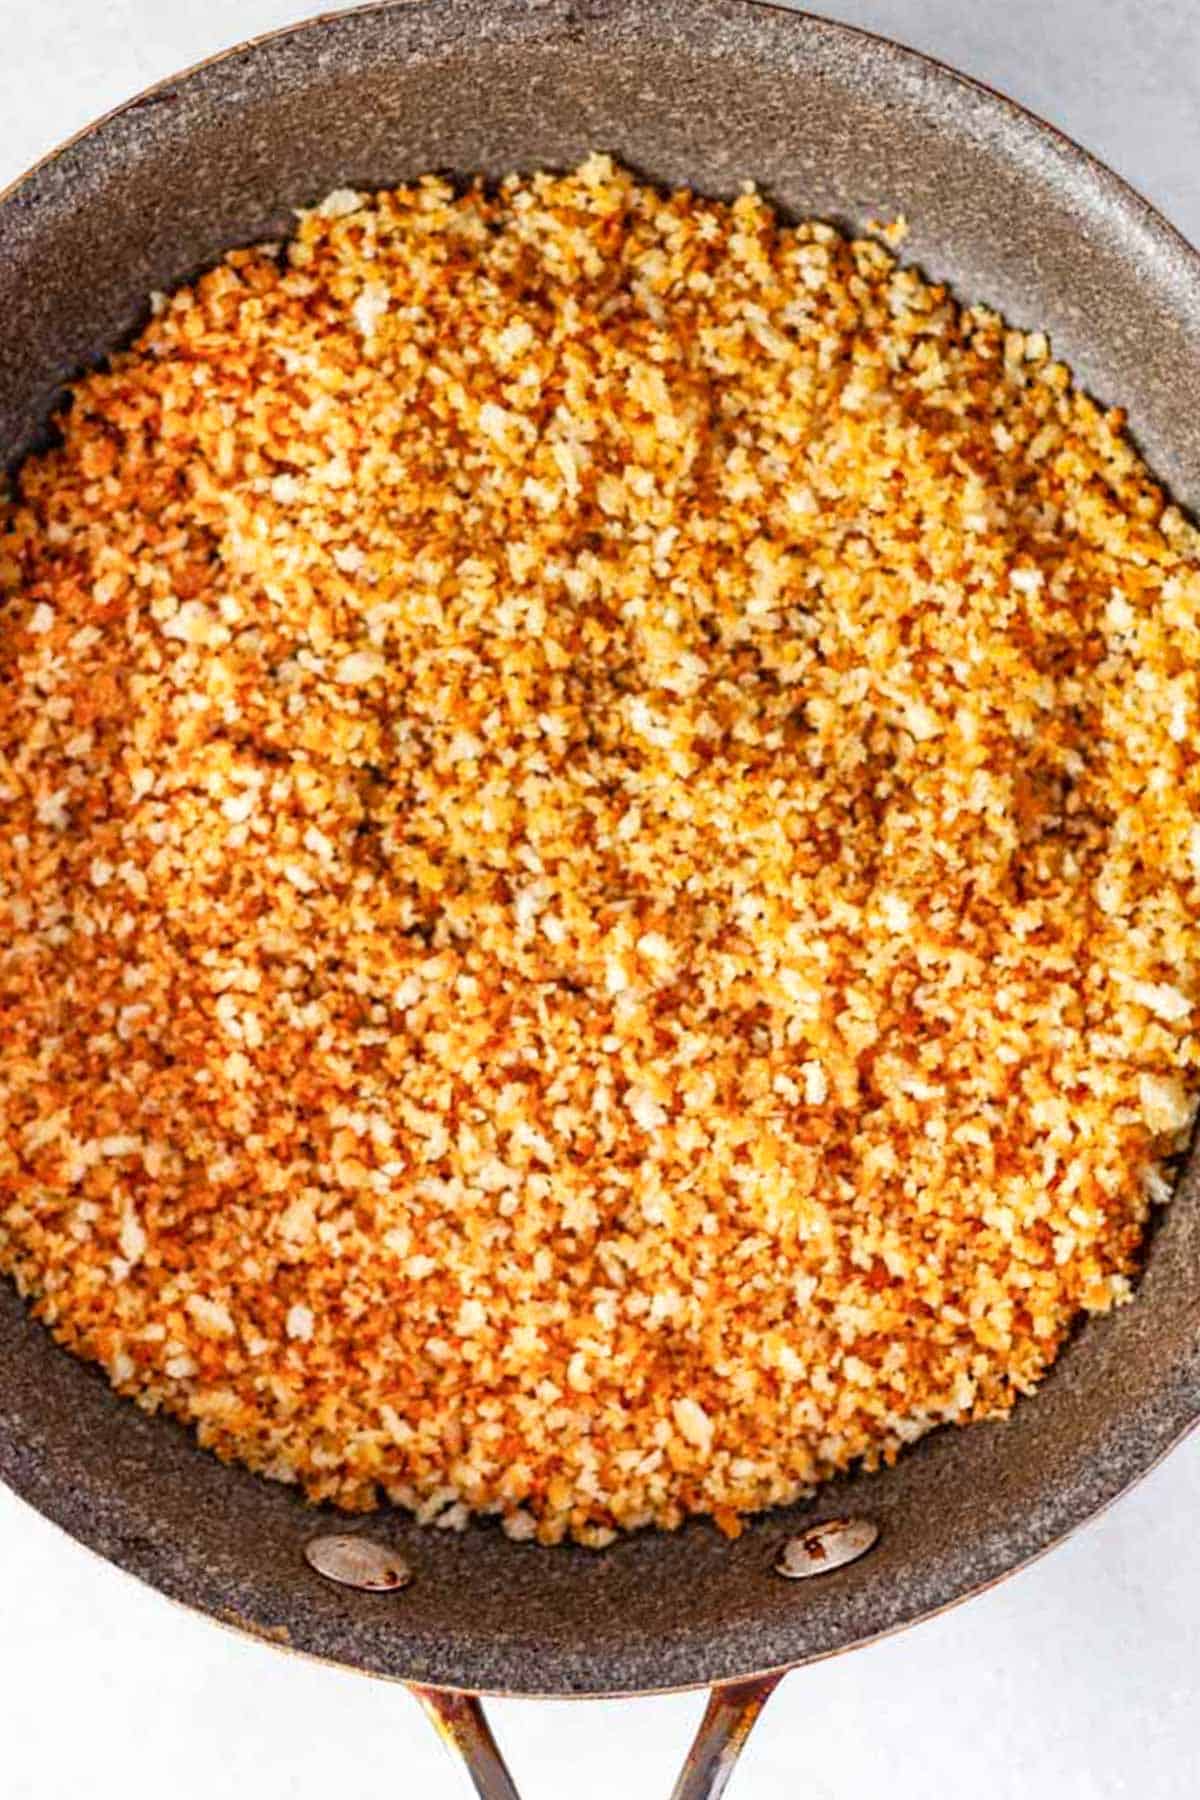 Toasted panko in a saute pan.